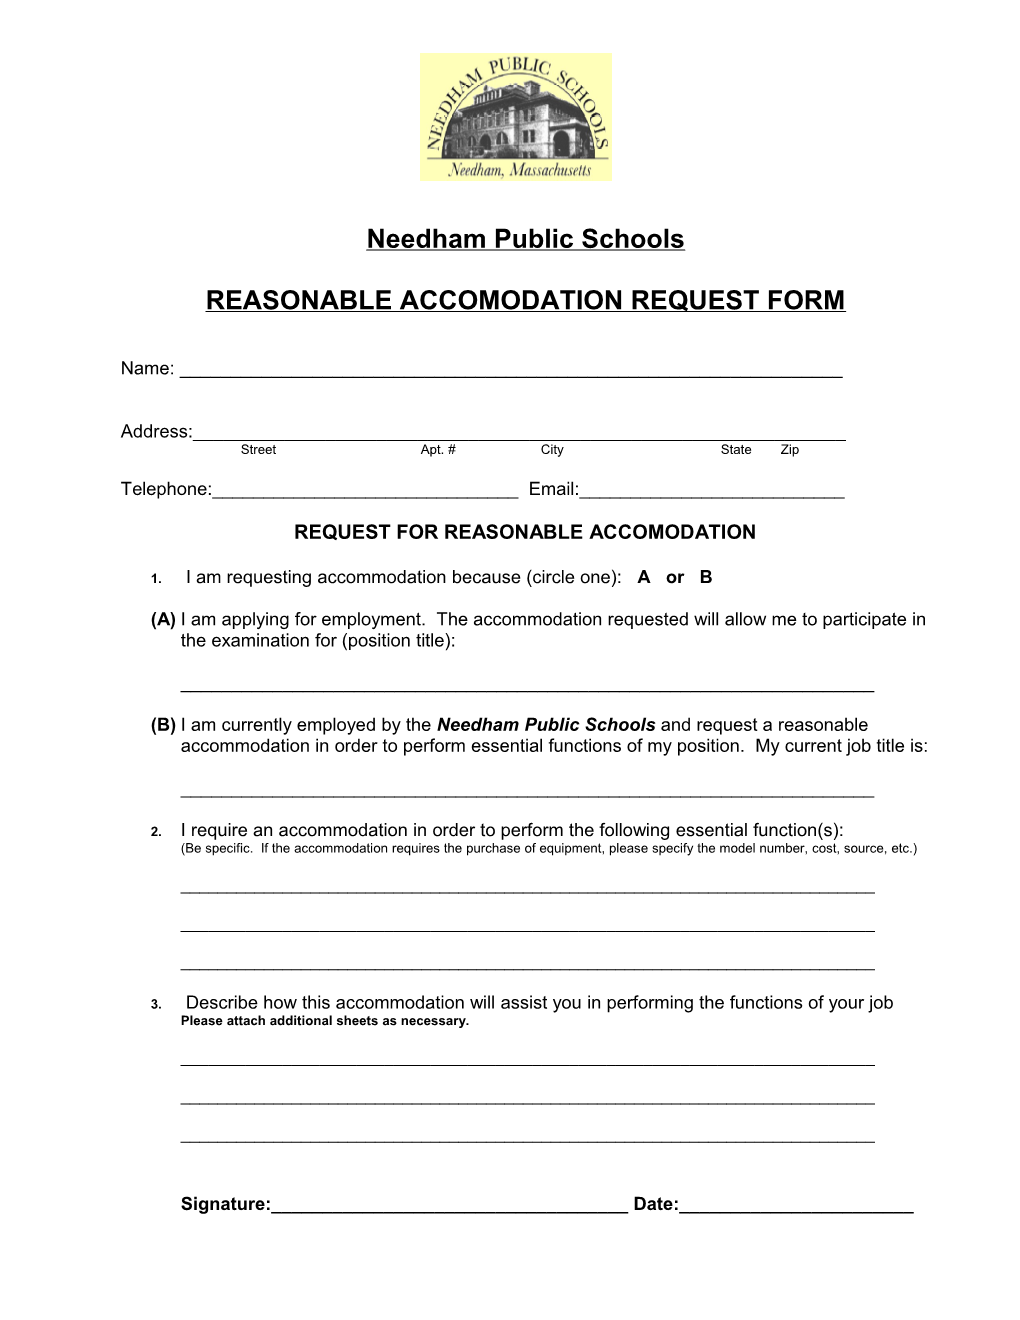 Reasonable Accomodation Request Form